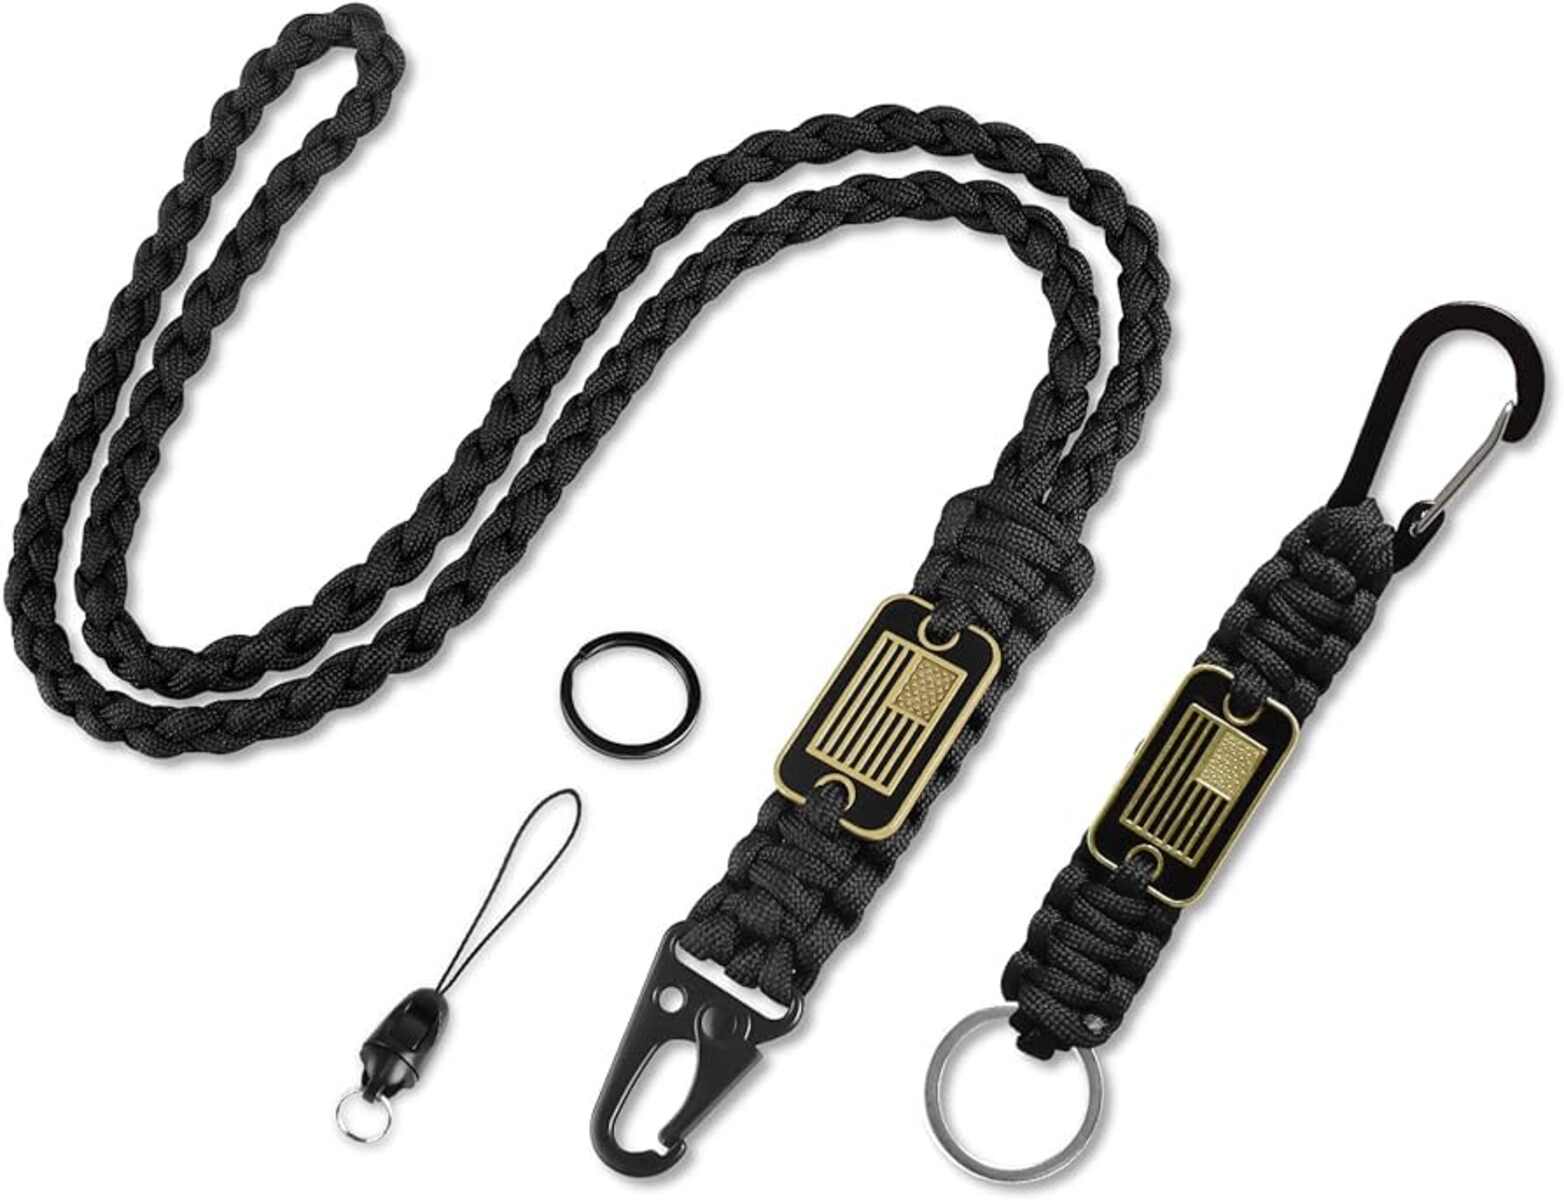 Crafting Durable Lanyards With Paracord